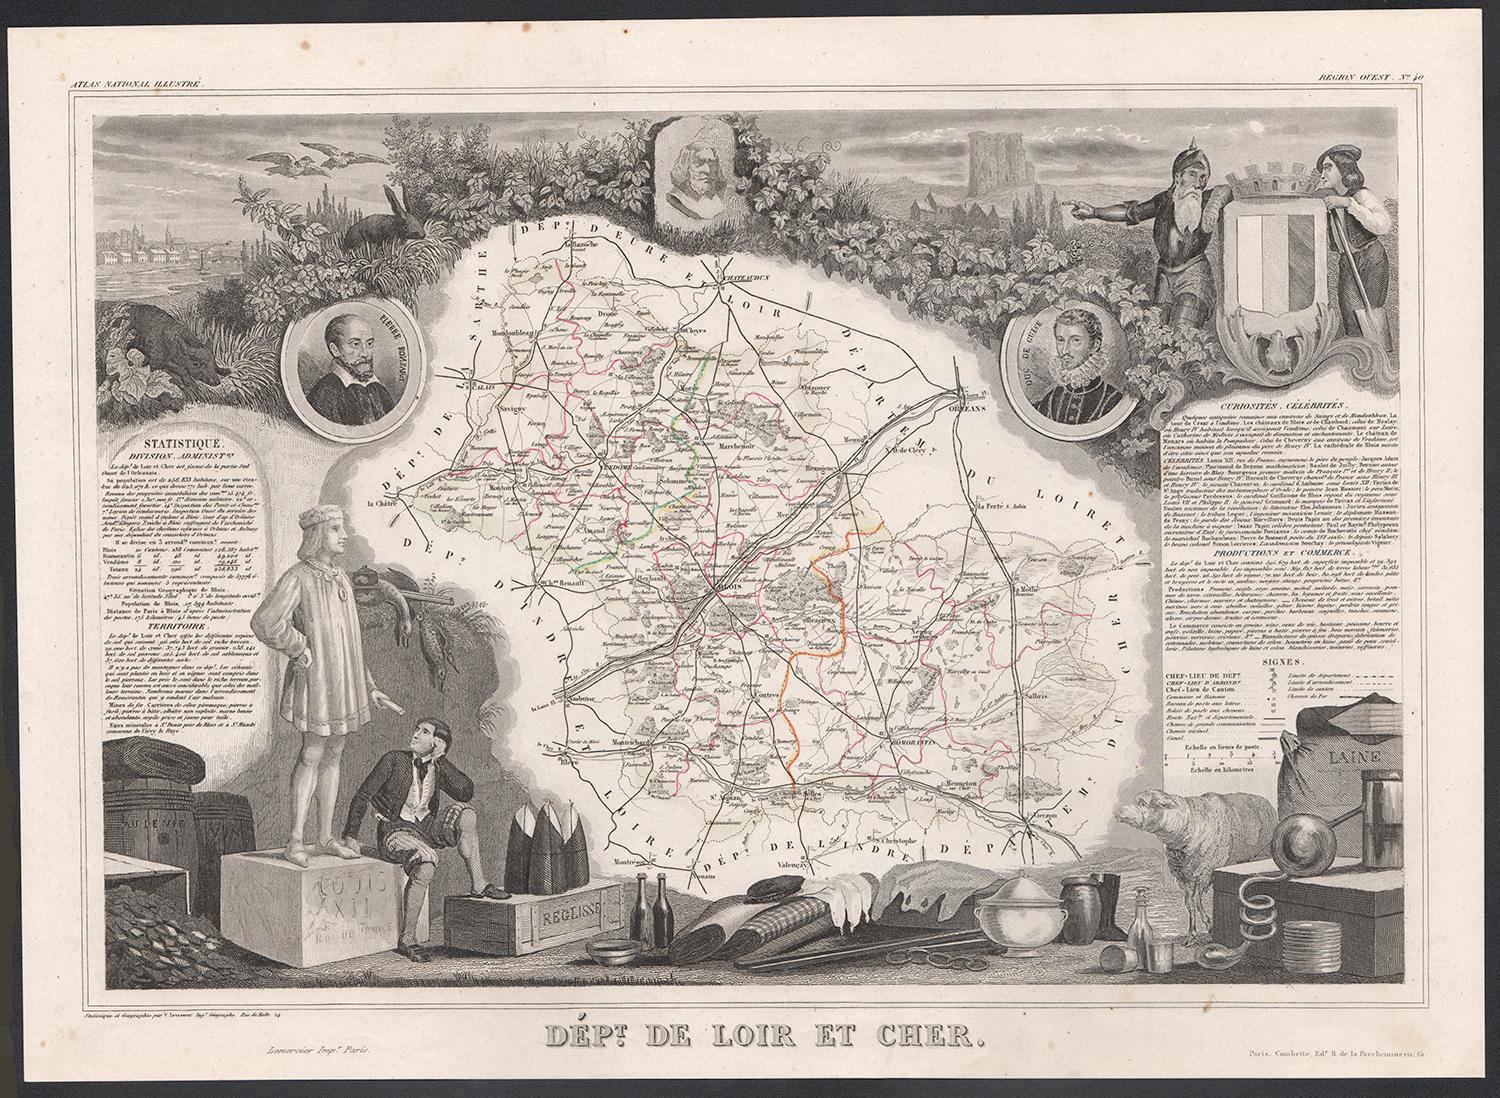 Loir and Cher, France. Antique map of a French department, 1856